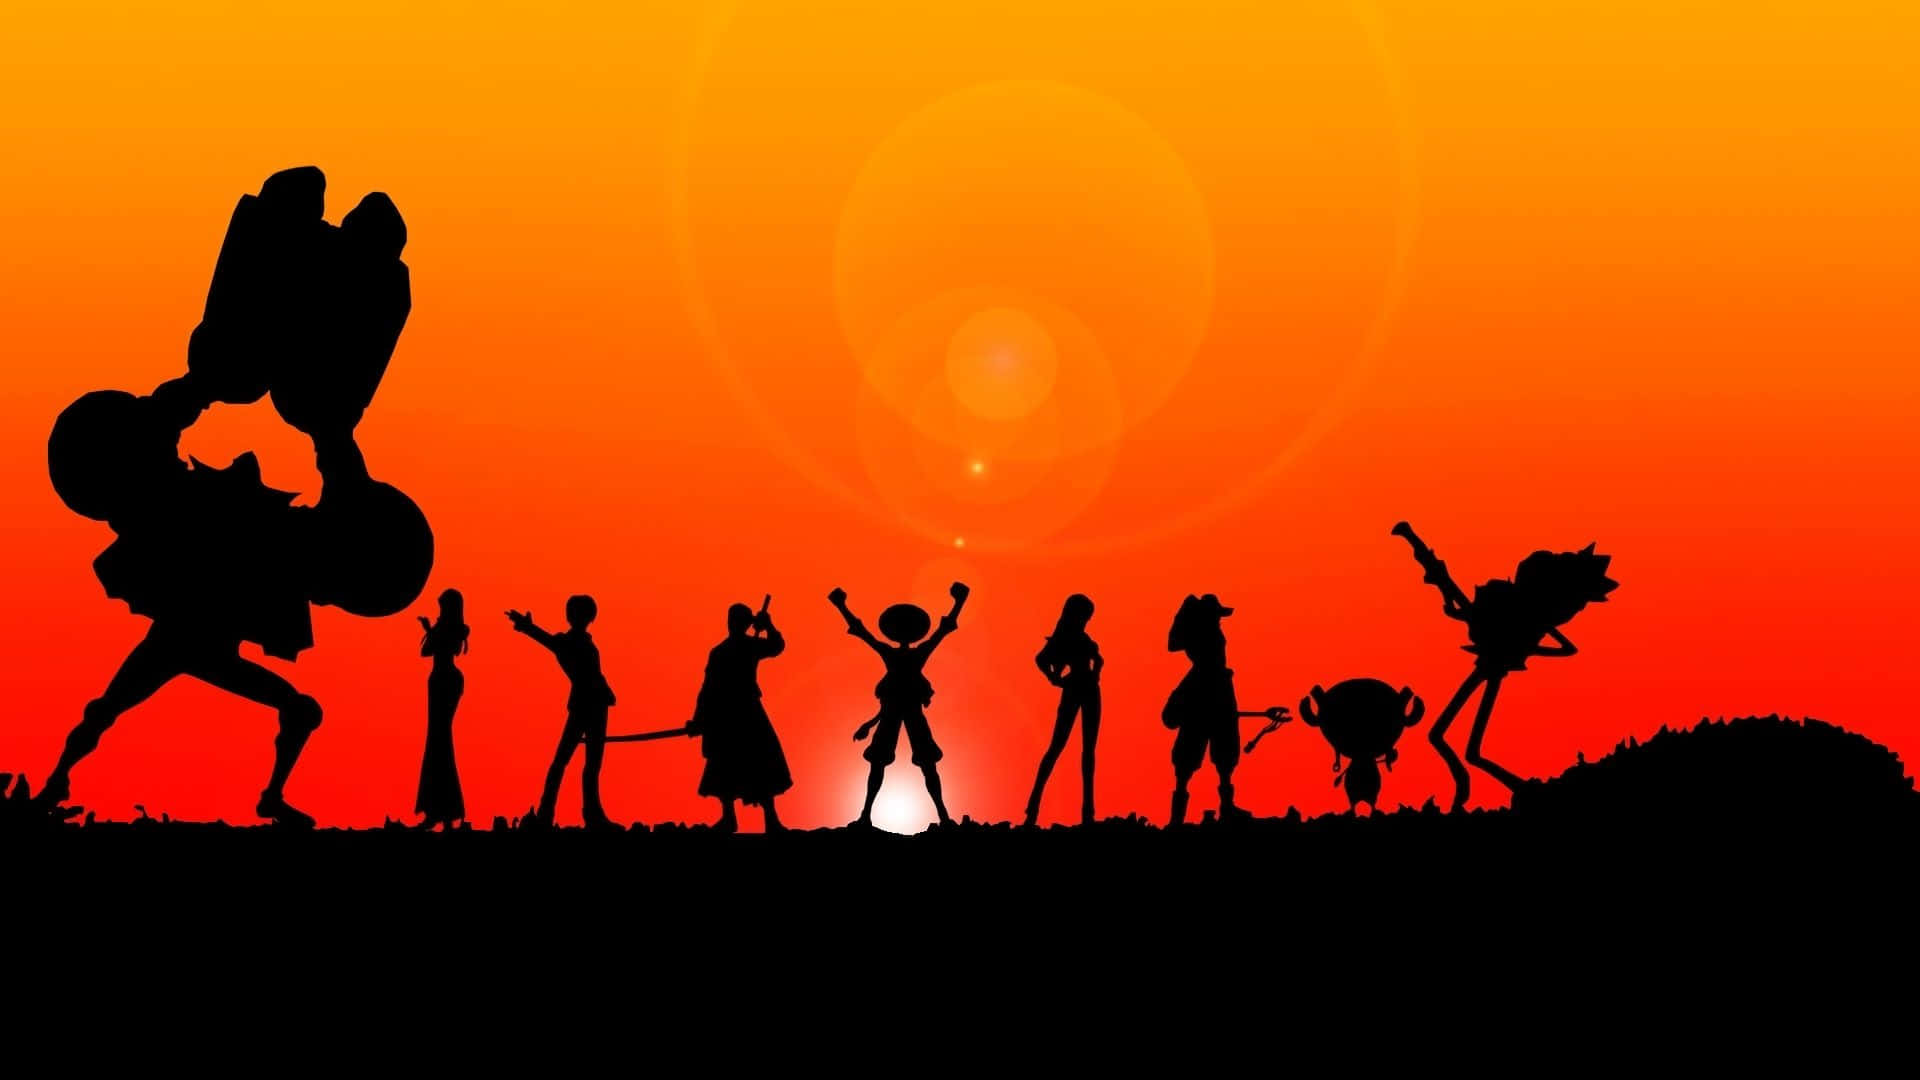 One Piece Sunset Silhouette Wallpaper